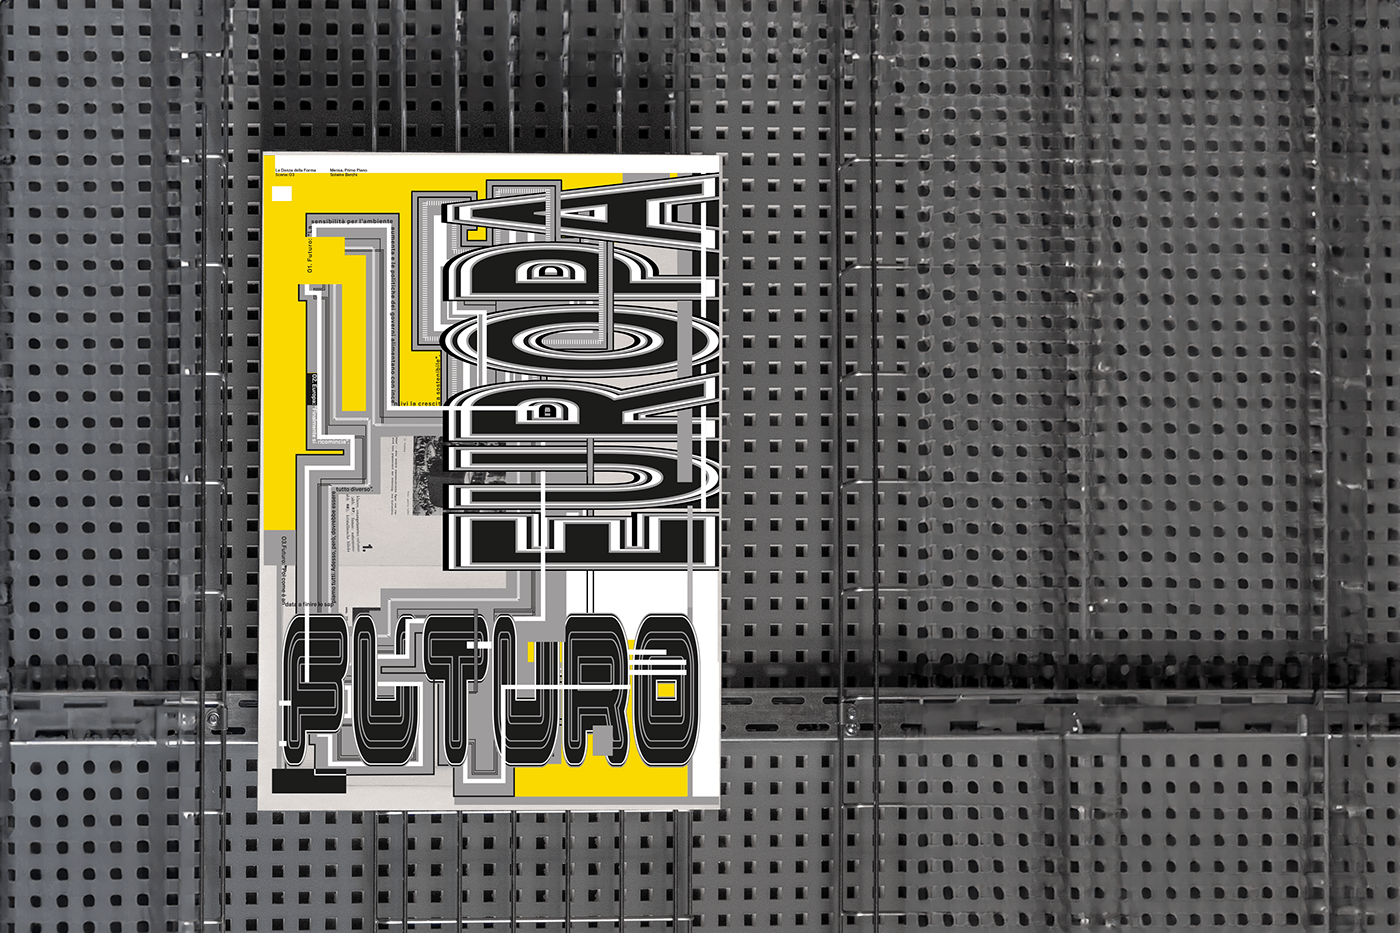 experimental typographic poster with the theme of europe and the future